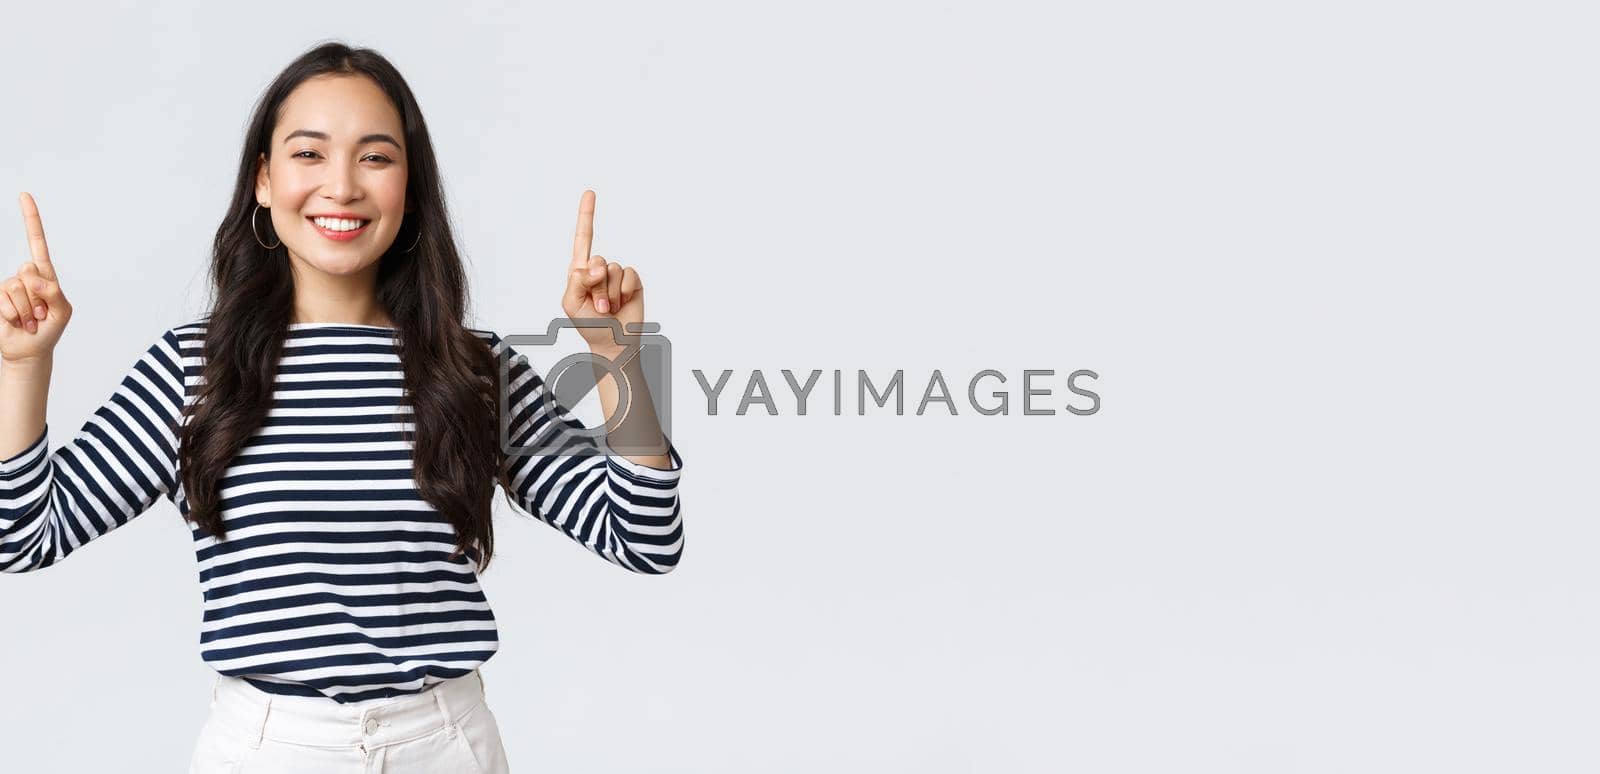 Lifestyle, beauty and fashion, people emotions concept. Cheerful good-looking female model pointing fingers up to shop promotion banner, smiling camera, recommend click link to online store.